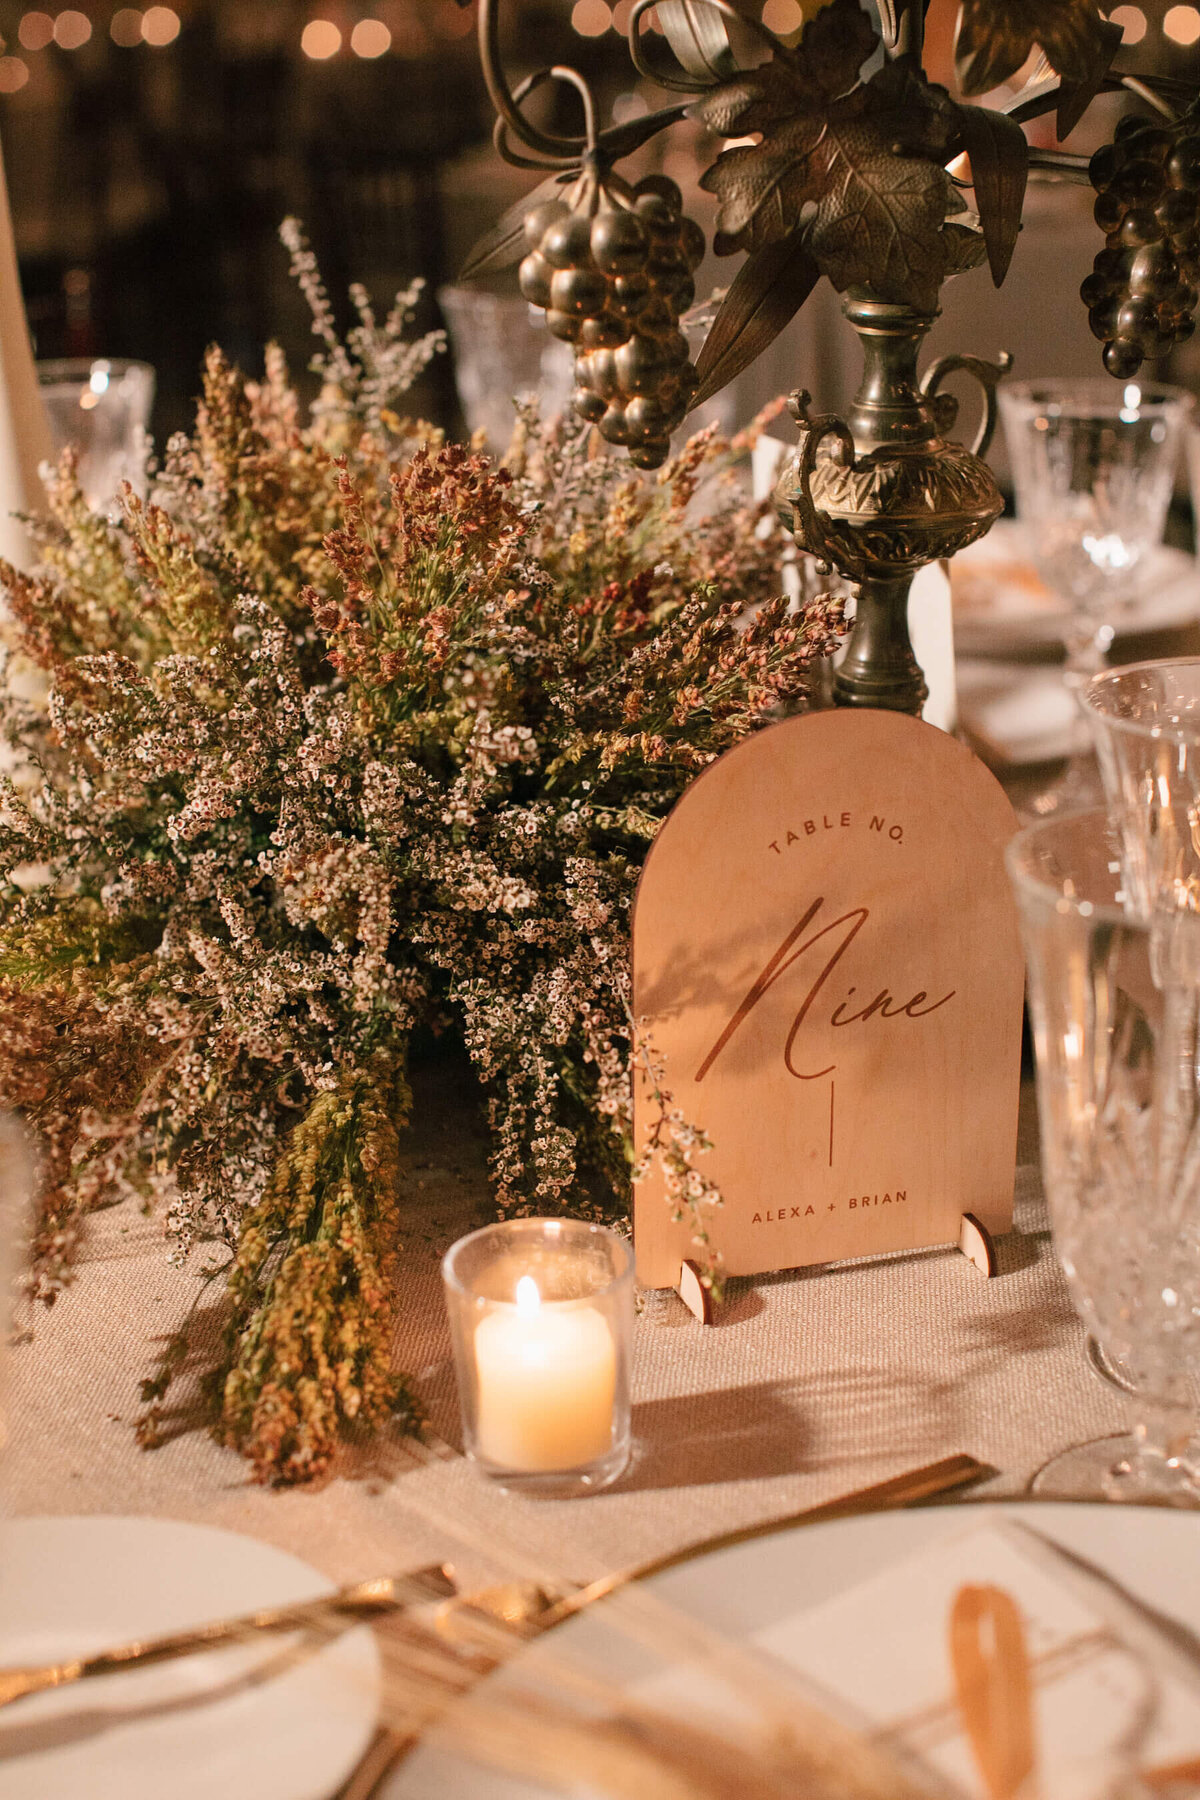 Dried flowers with wood table numbers and votive candles.